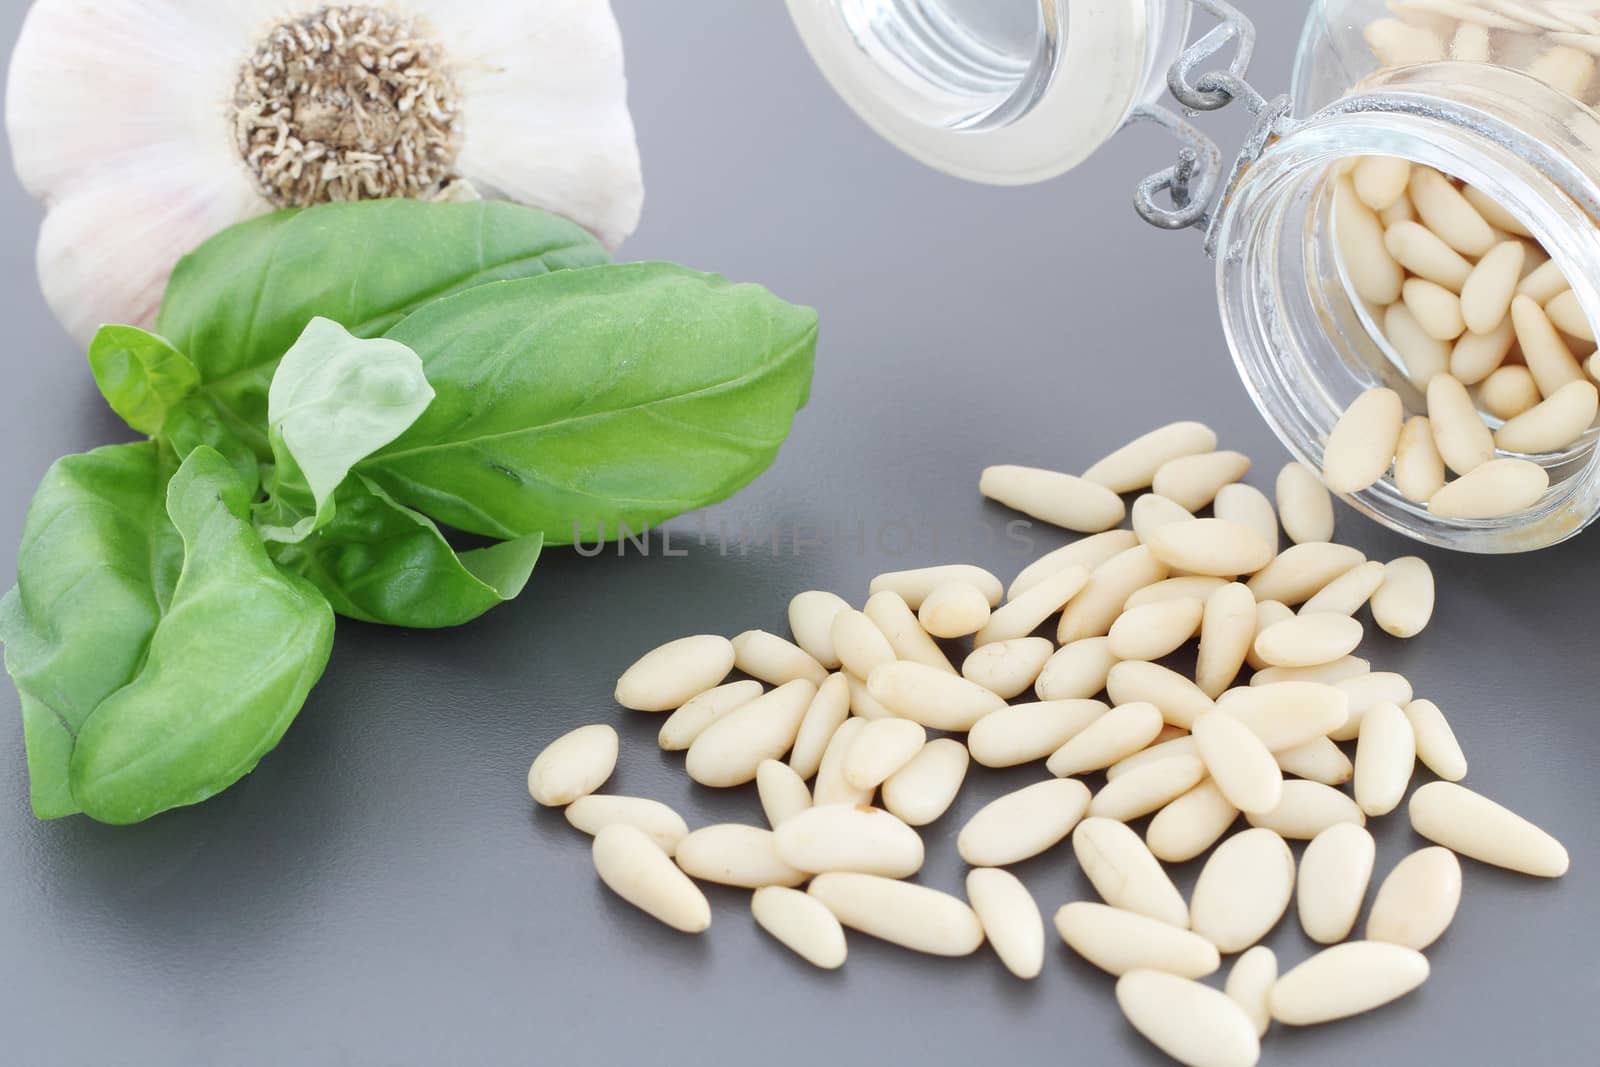 Pine nuts in glass jar and basil